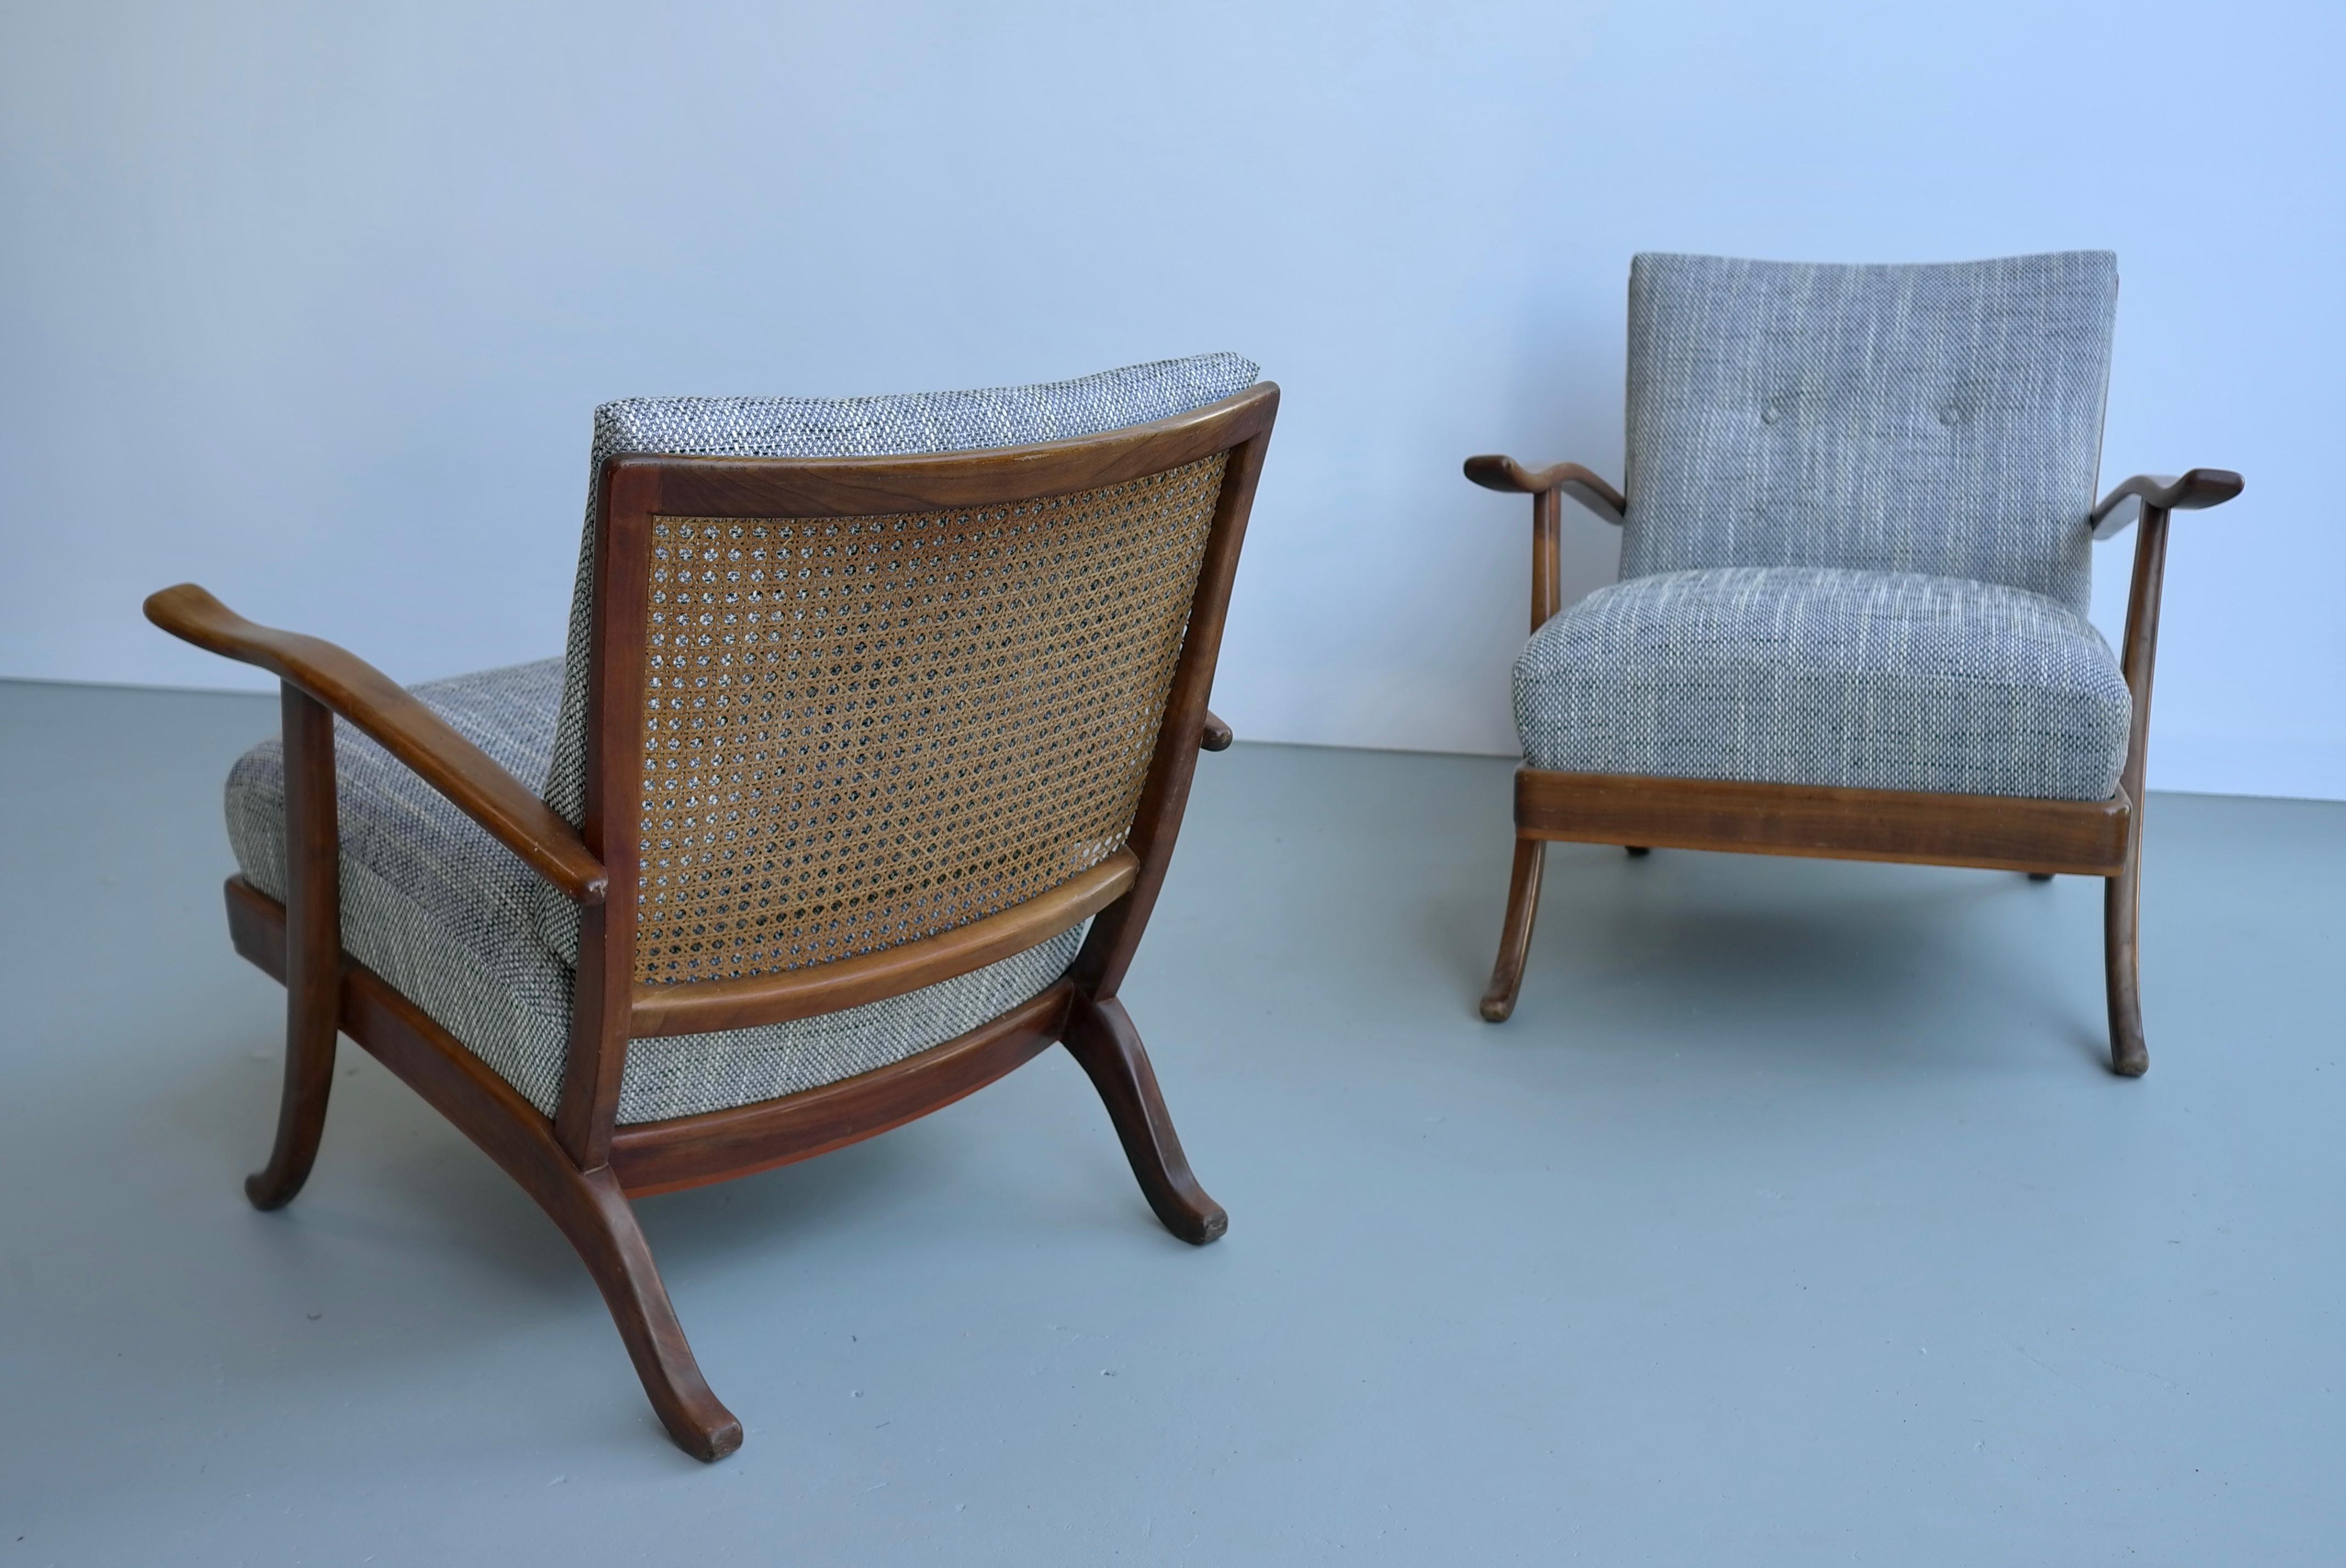 Italian Pair of Organic Lounge Chair in Wood and Wicker, Italy, 1950s